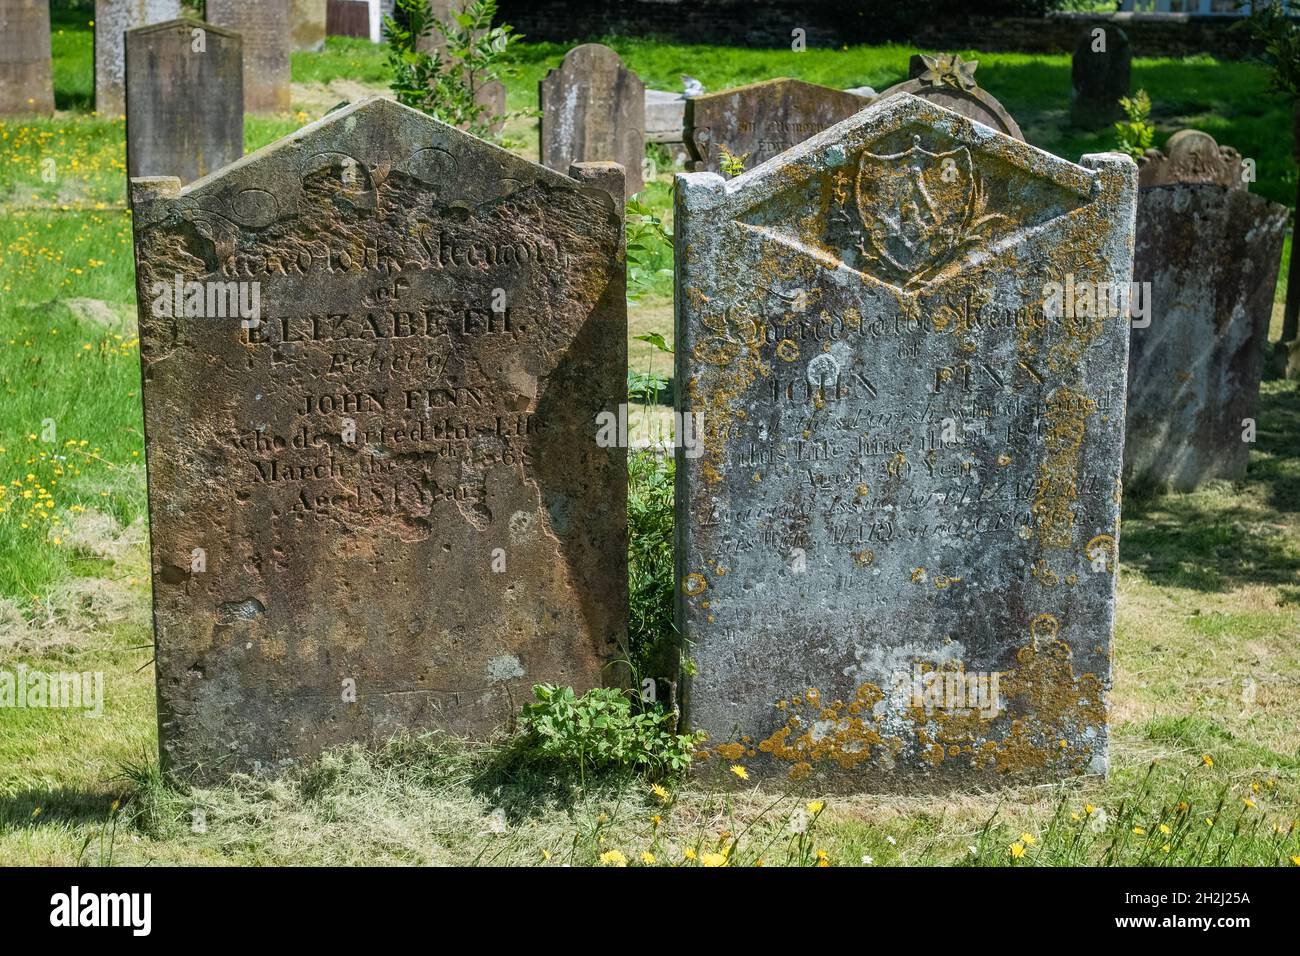 Two Headstones in the sunshine, Lydd Burial ground Kent Stock Photo